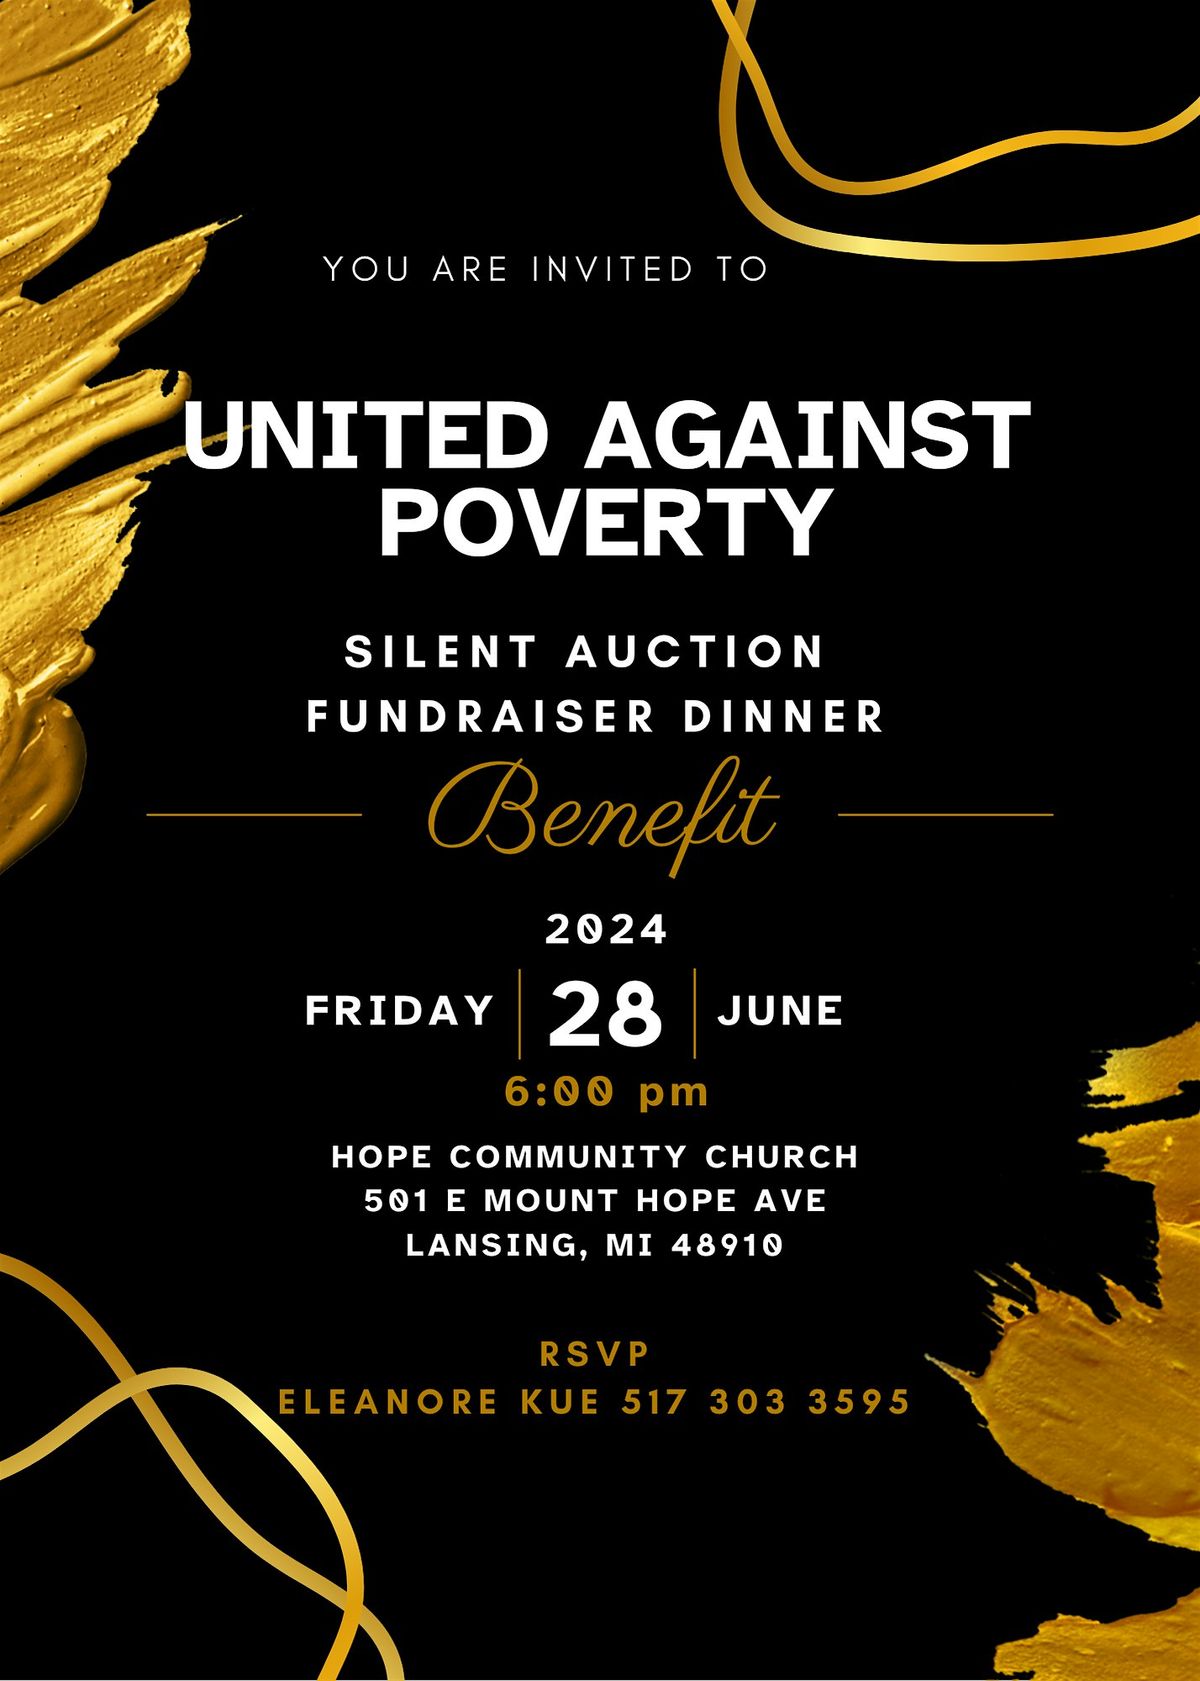 United Against Poverty Silent Auction and Fundraiser Dinner